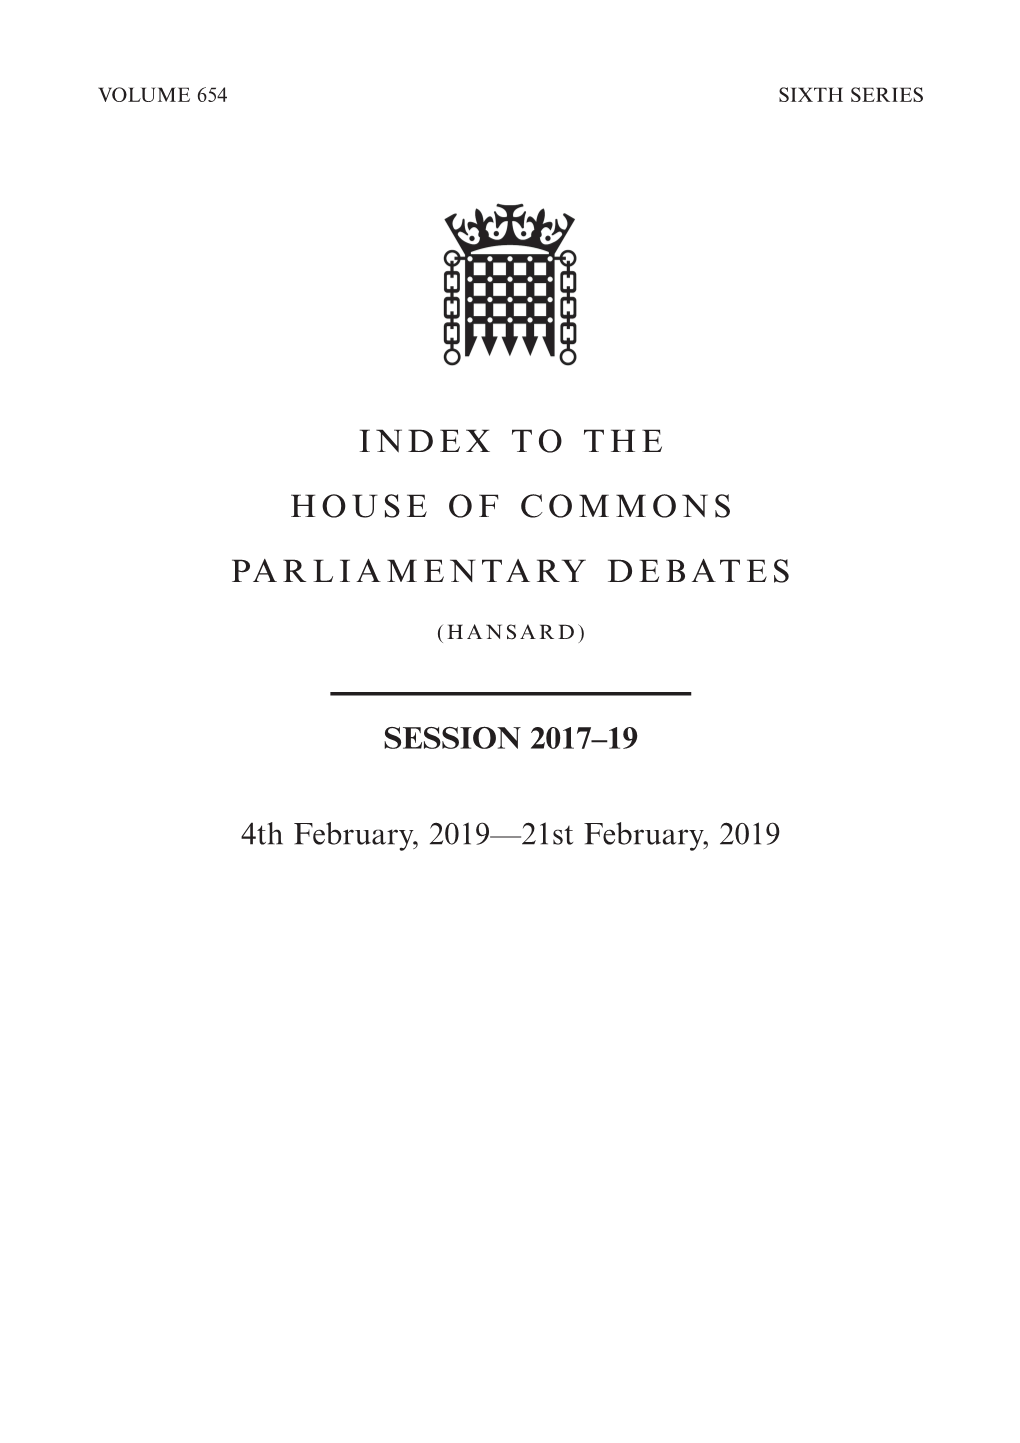 Index to the House of Commons Parliamentary Debates